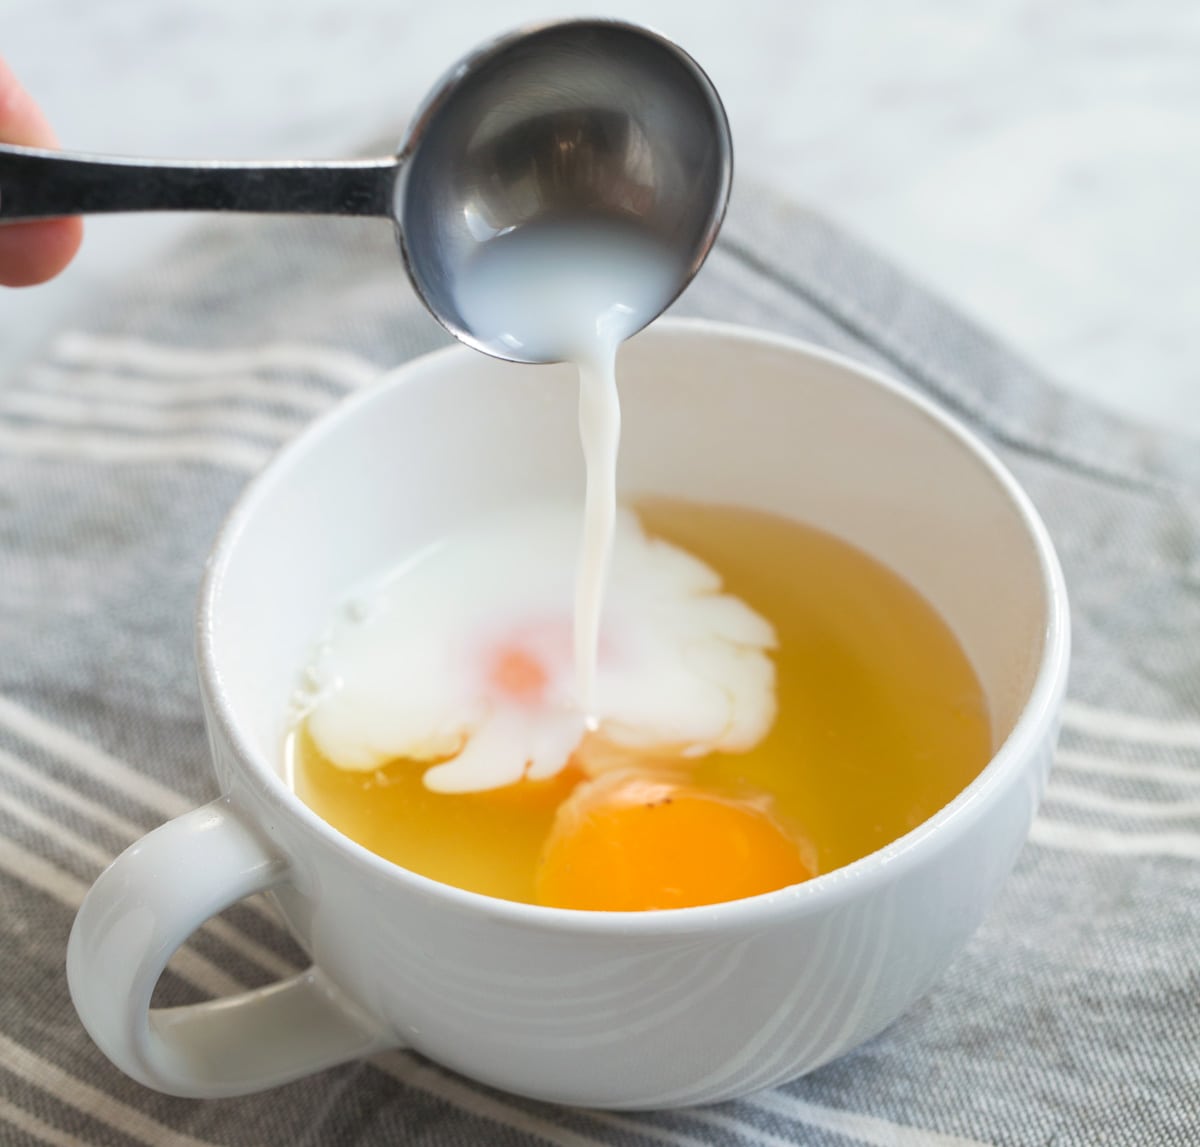 Adding Milk to eggs in cup